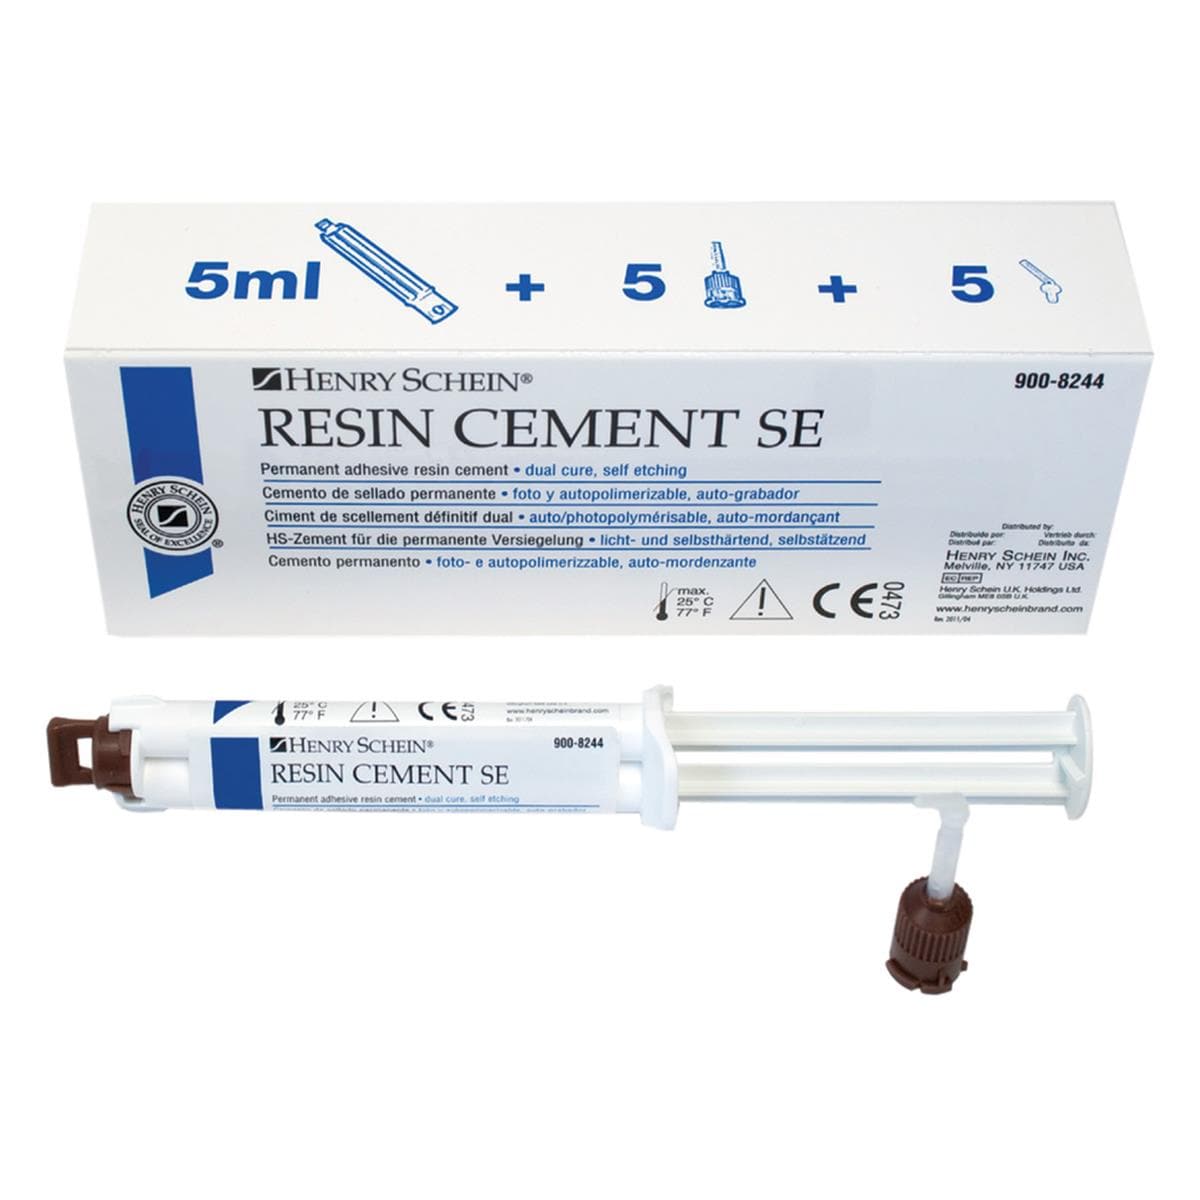 HS Resin Cement SE dual-cure 5ml syringe + tips - Henry Schein Ireland